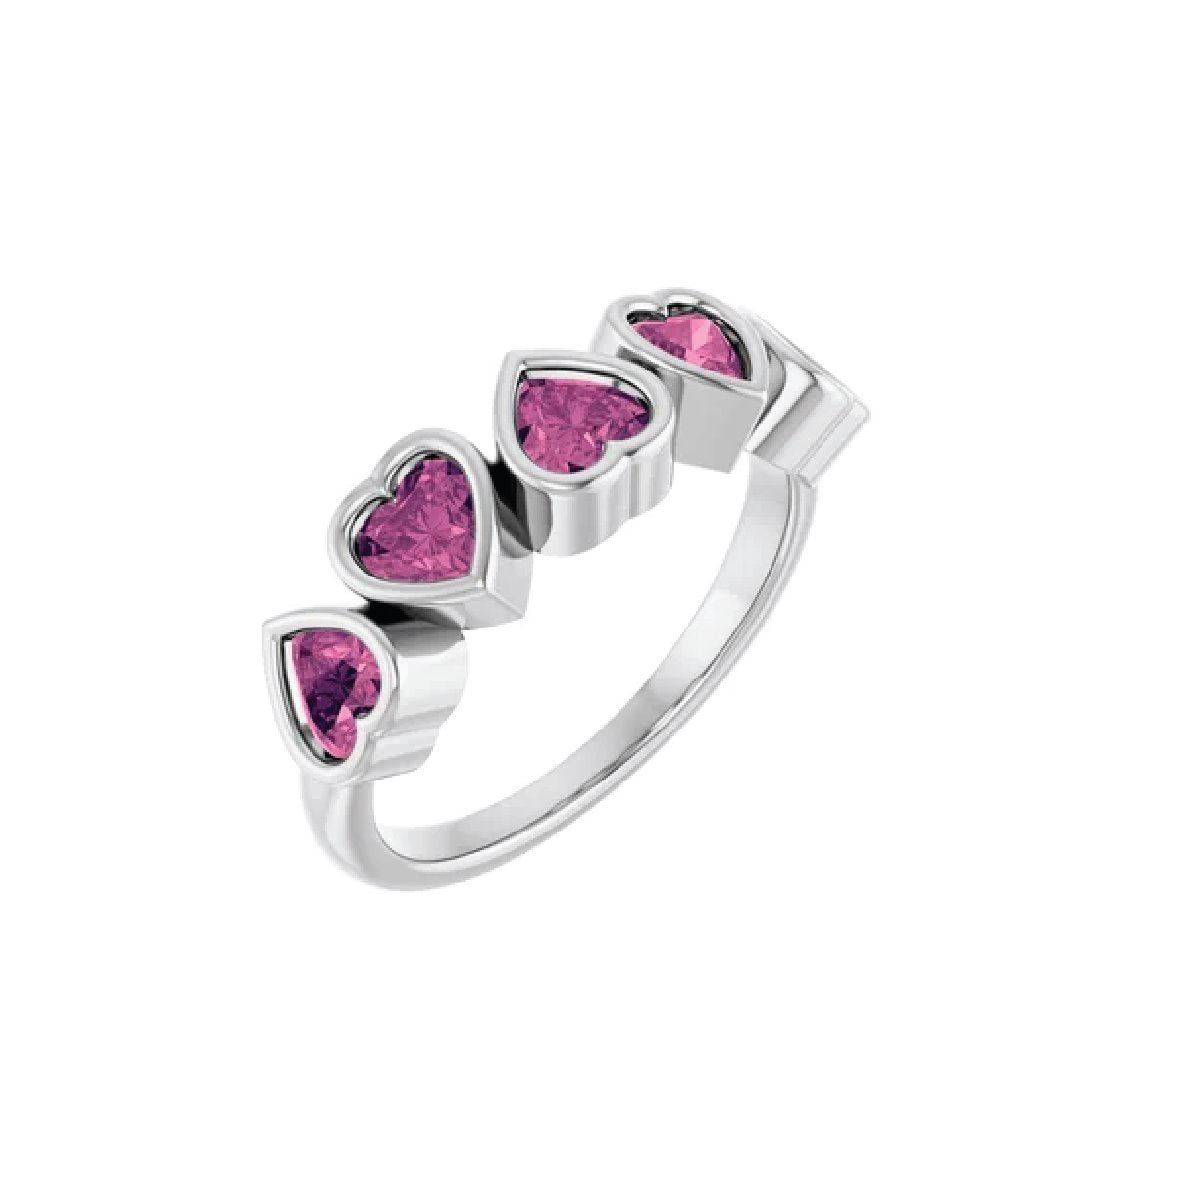 Gemstone Heart Ring Ring Robyn Canady 6 Pink Tourmaline Sterling Silver